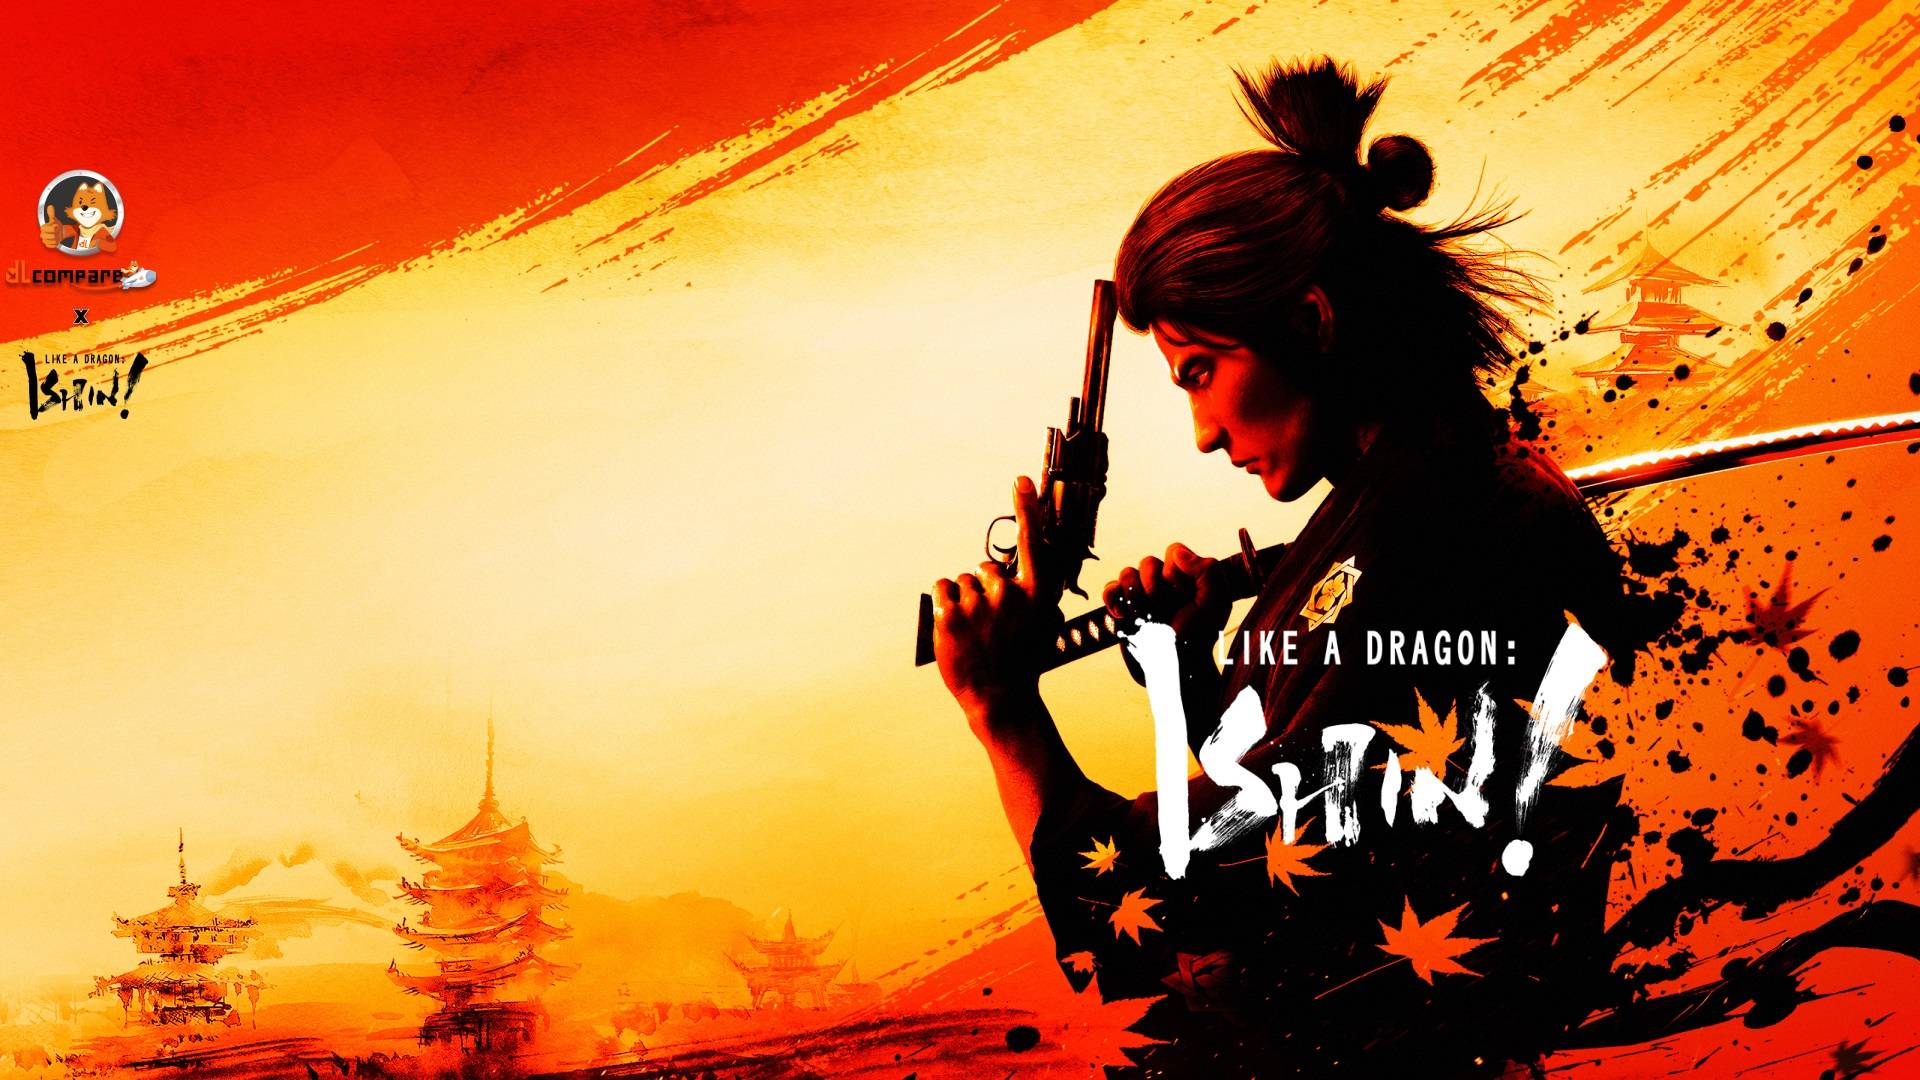 Restore your honor in Like a Dragon: Ishin!